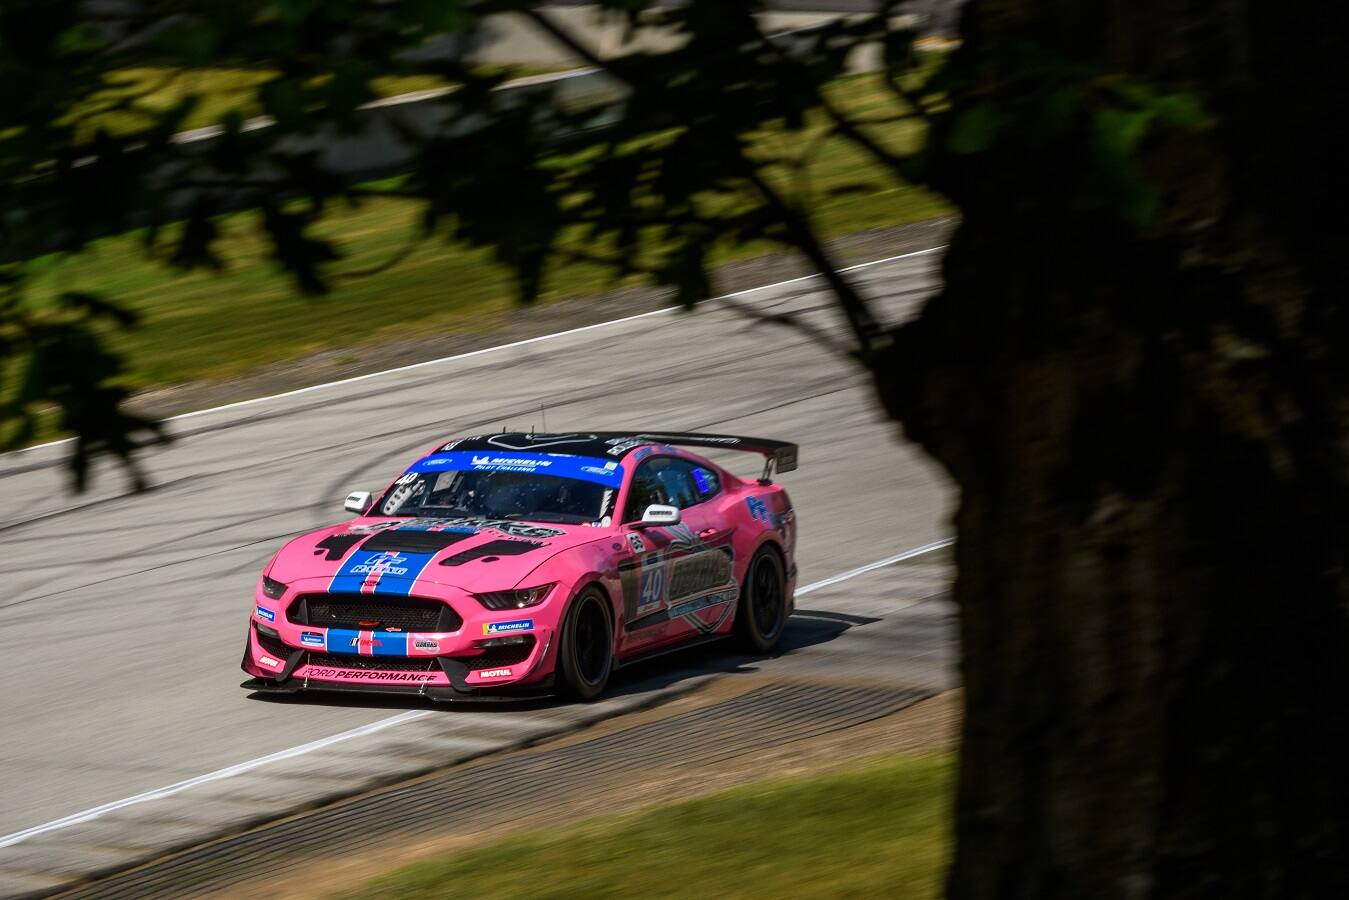 Joey Hand joined James Pesek in the No. 40 Mustang GT4 due to a scheduling conflict.